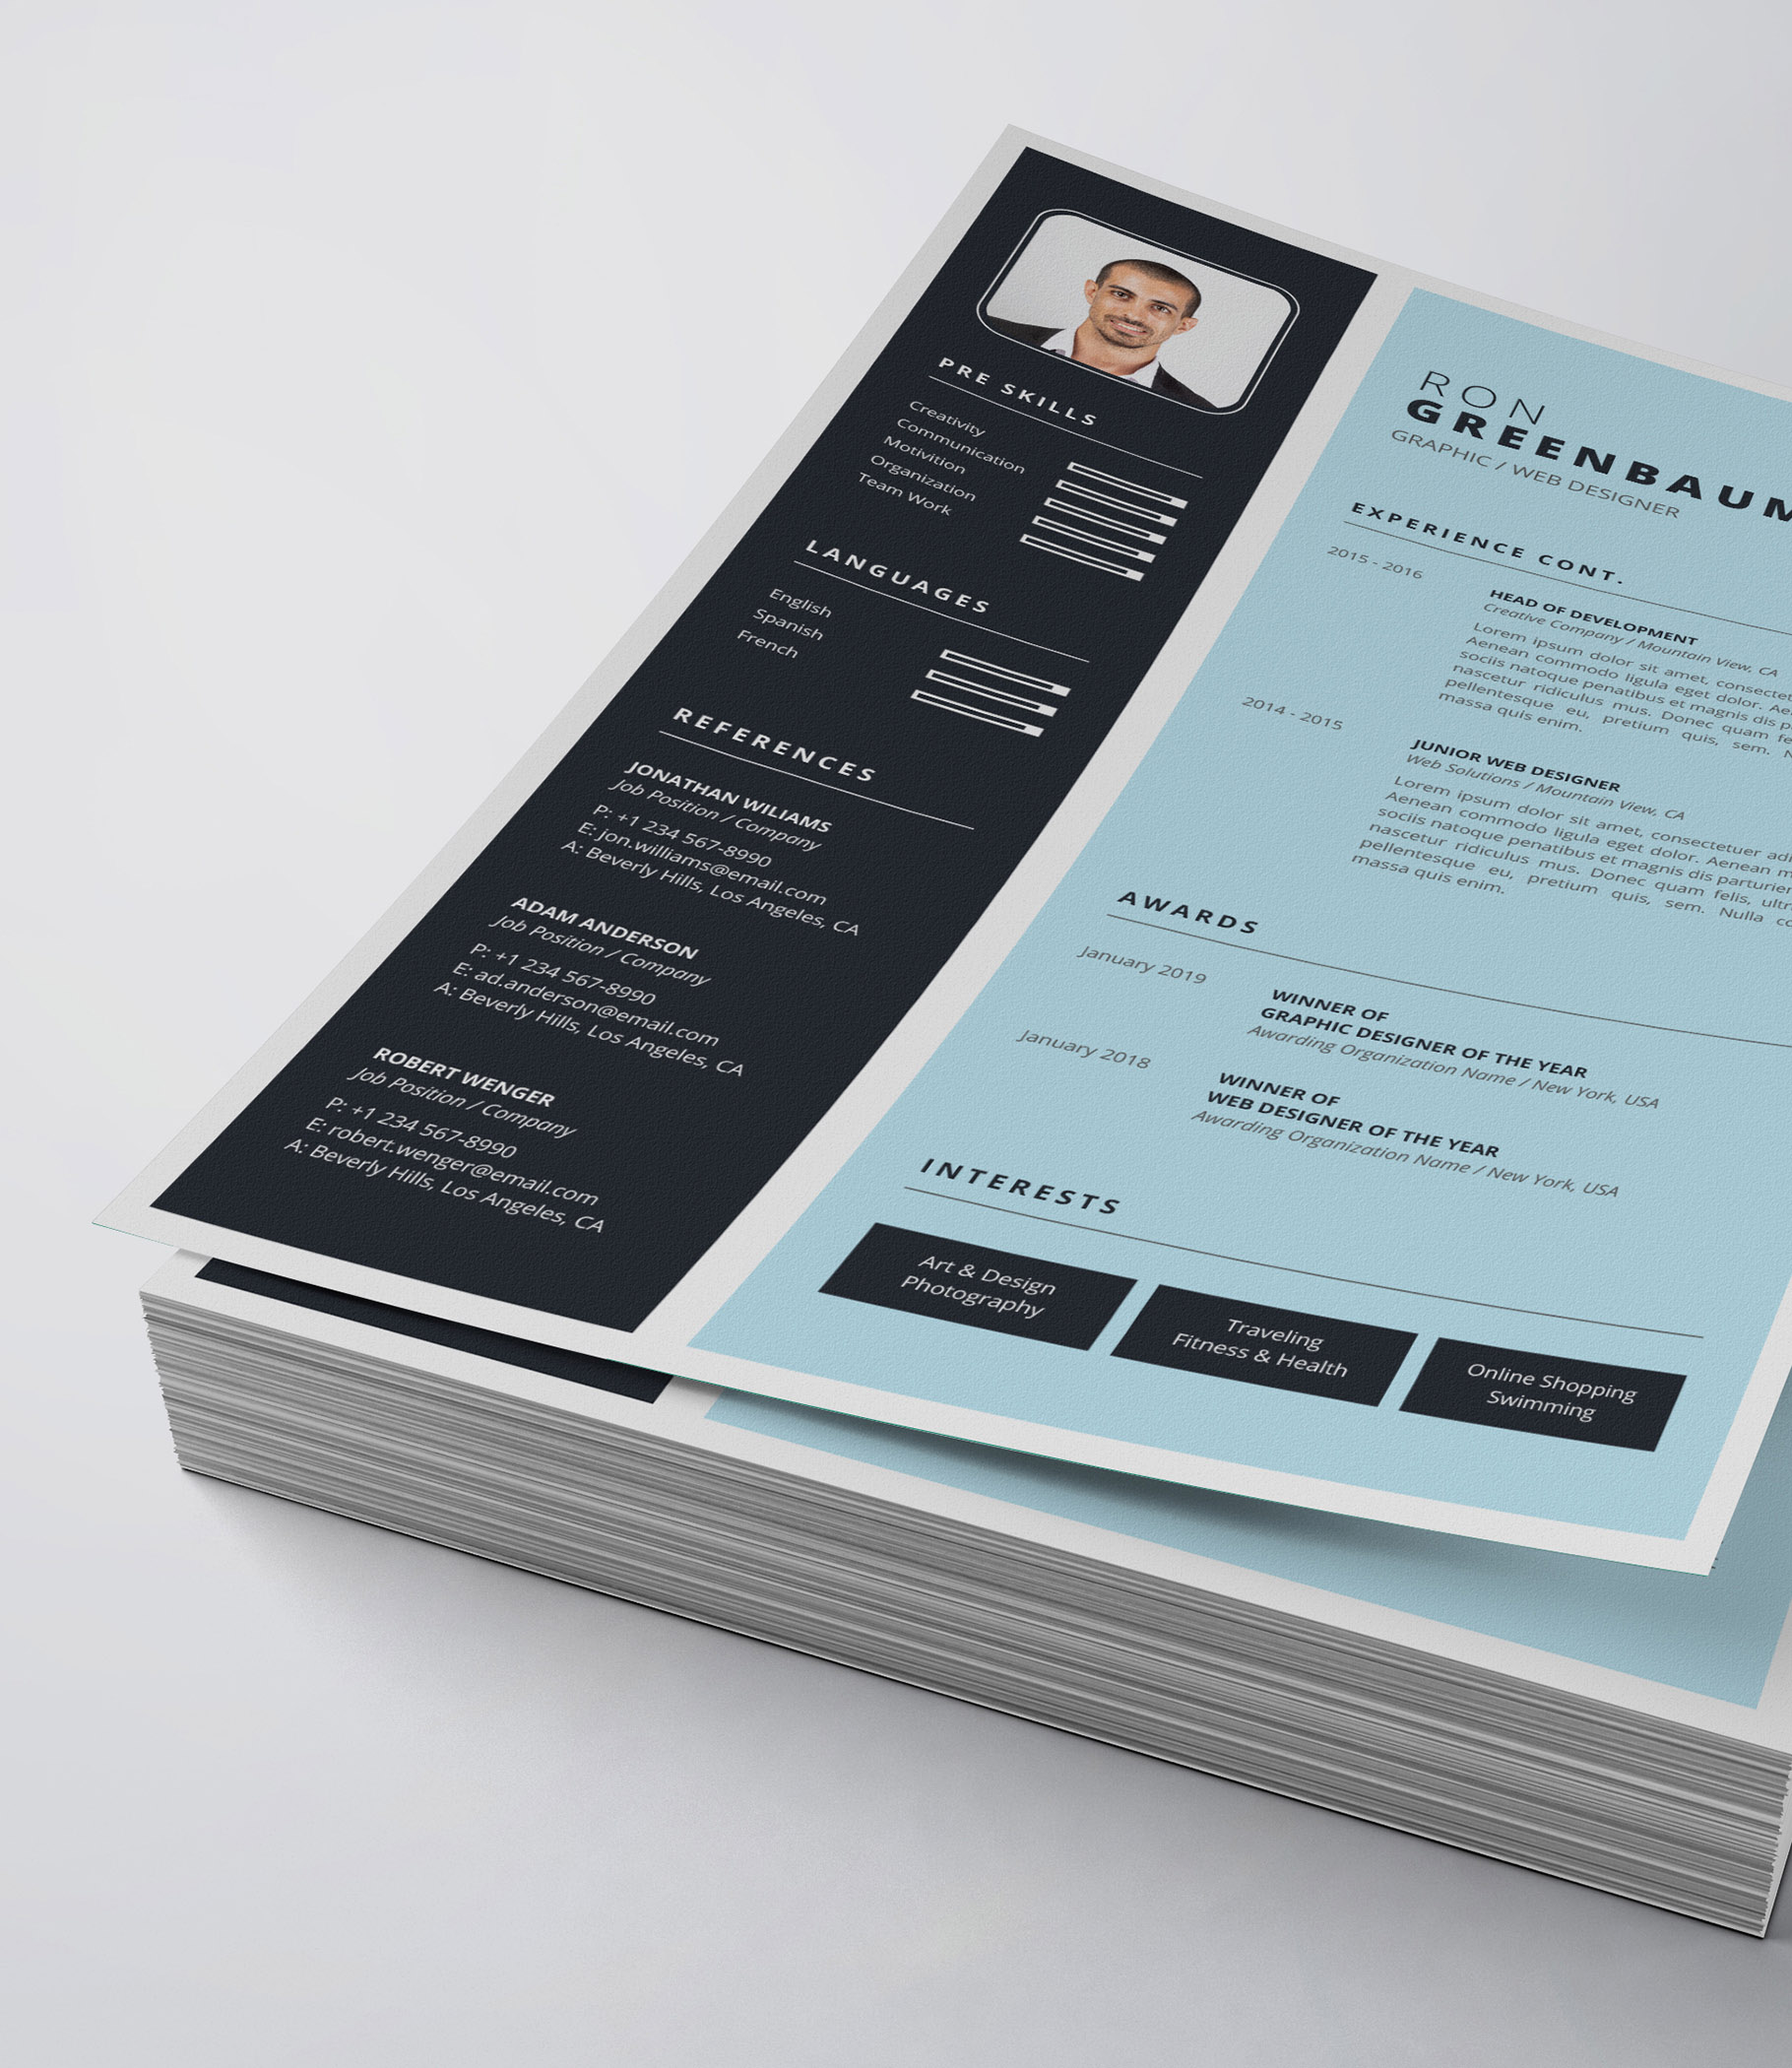 Blue and black resume on top of a stack of papers.